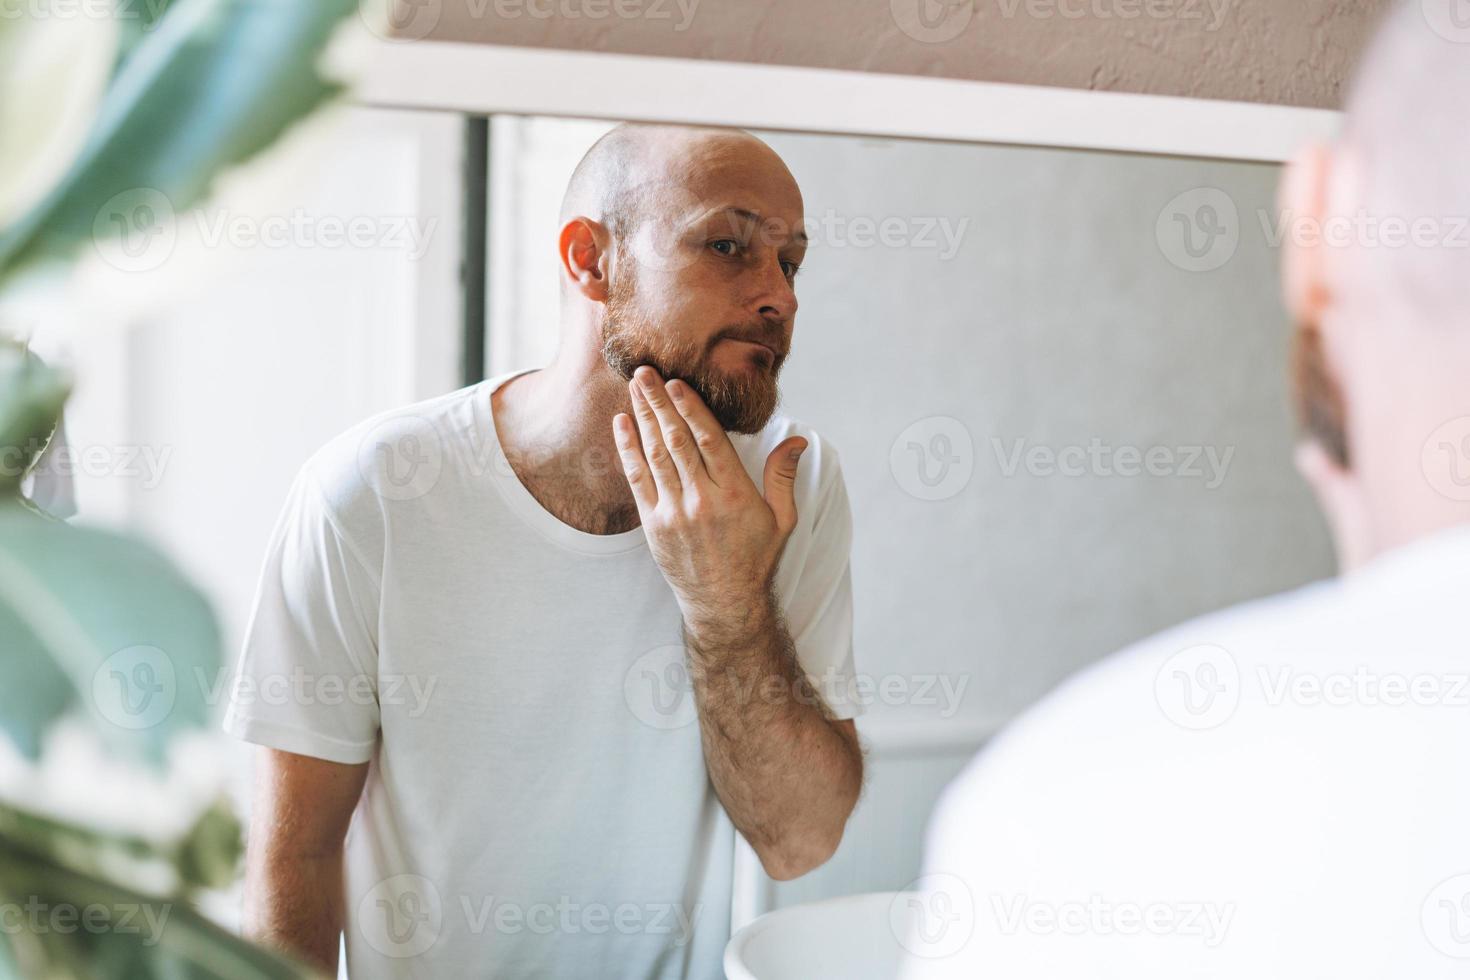 Handsome bald man looking at mirror and touching face in bathroom photo